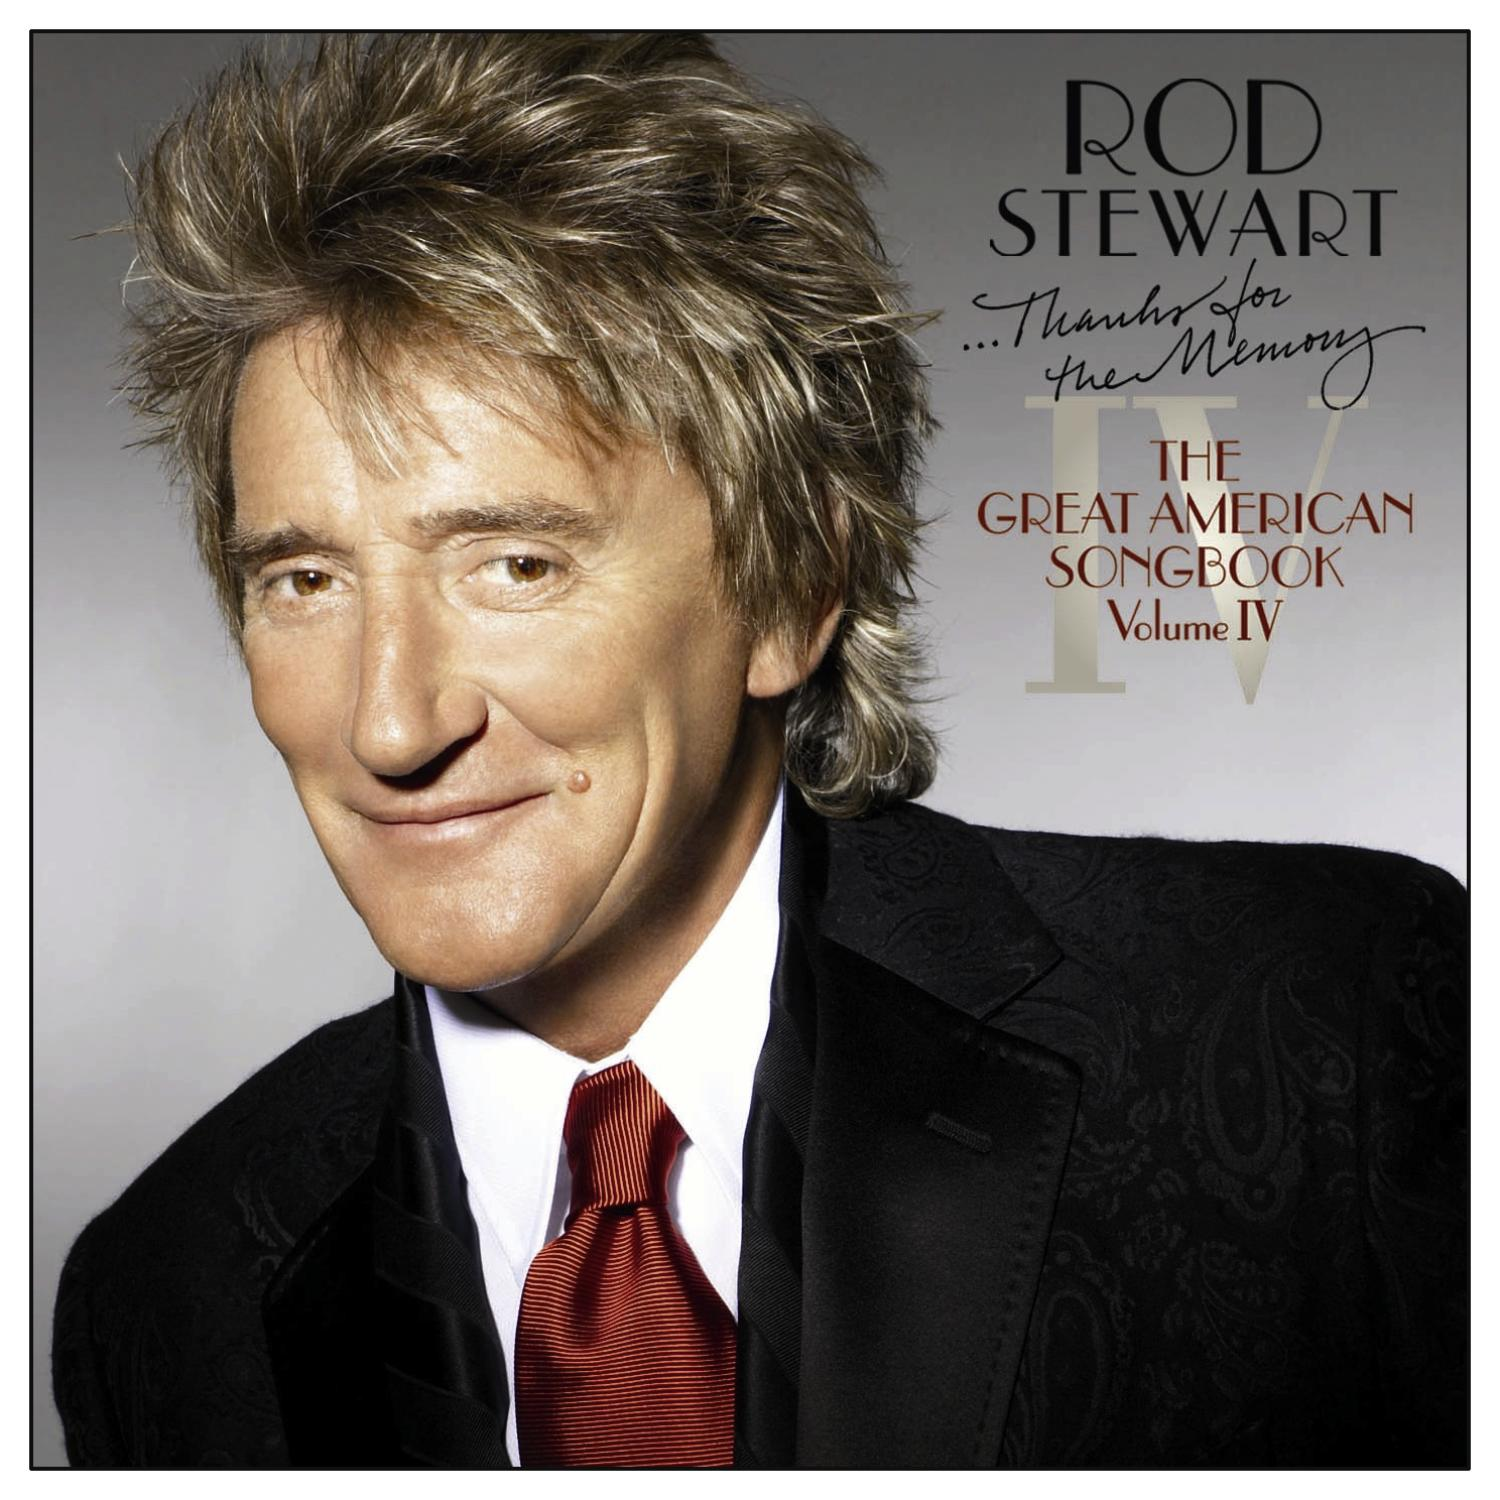 Rod Stewart - THE - THANKS AMERICAN THE FOR (CD) - MEMORY SONGB.4 GREAT